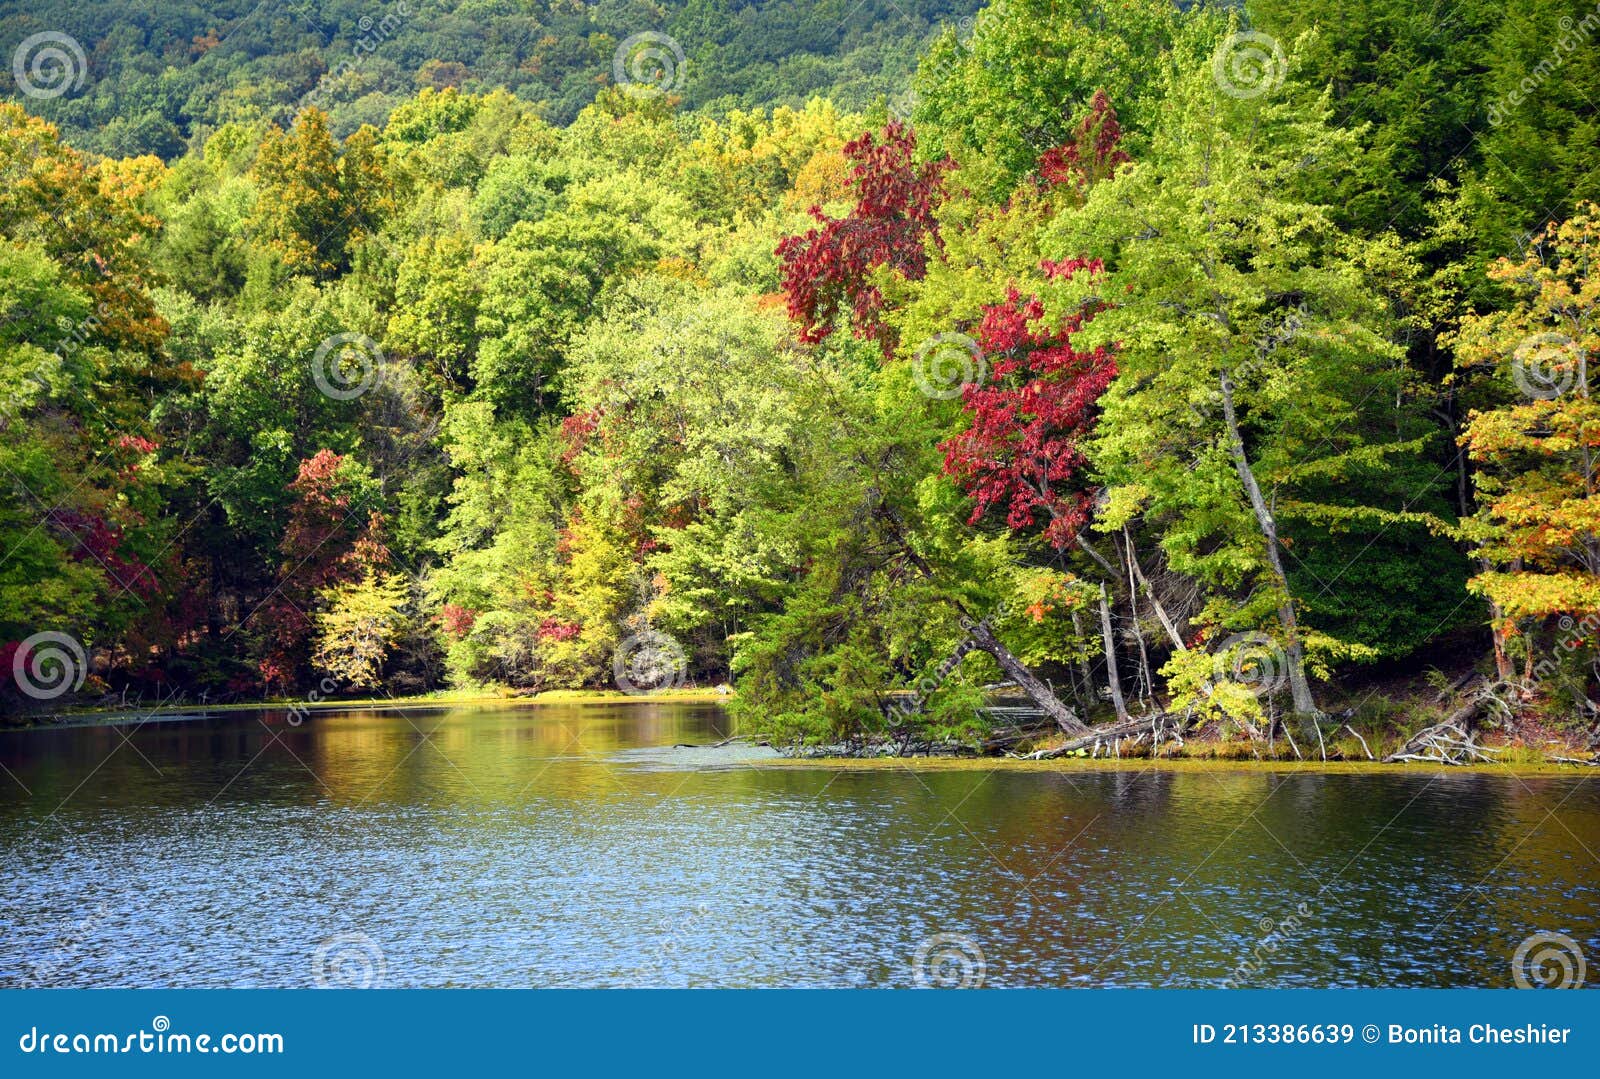 leaning tree over bays mountain lake